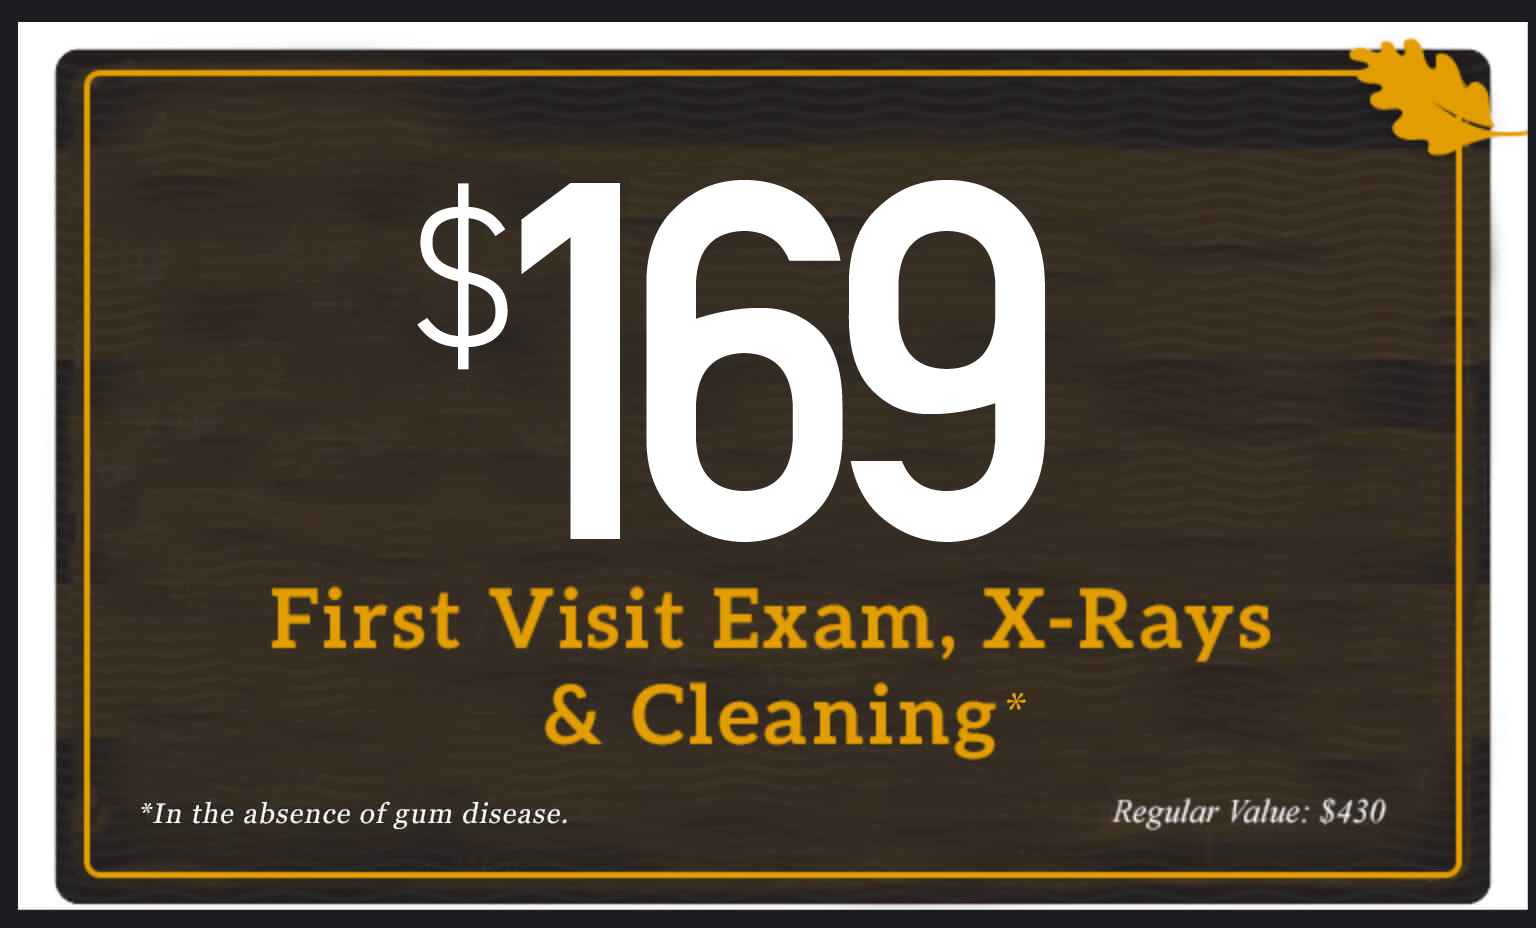 $149 First Visit Exam, X-rays, and Cleaning in the absence of gum disease. Regular value $430.